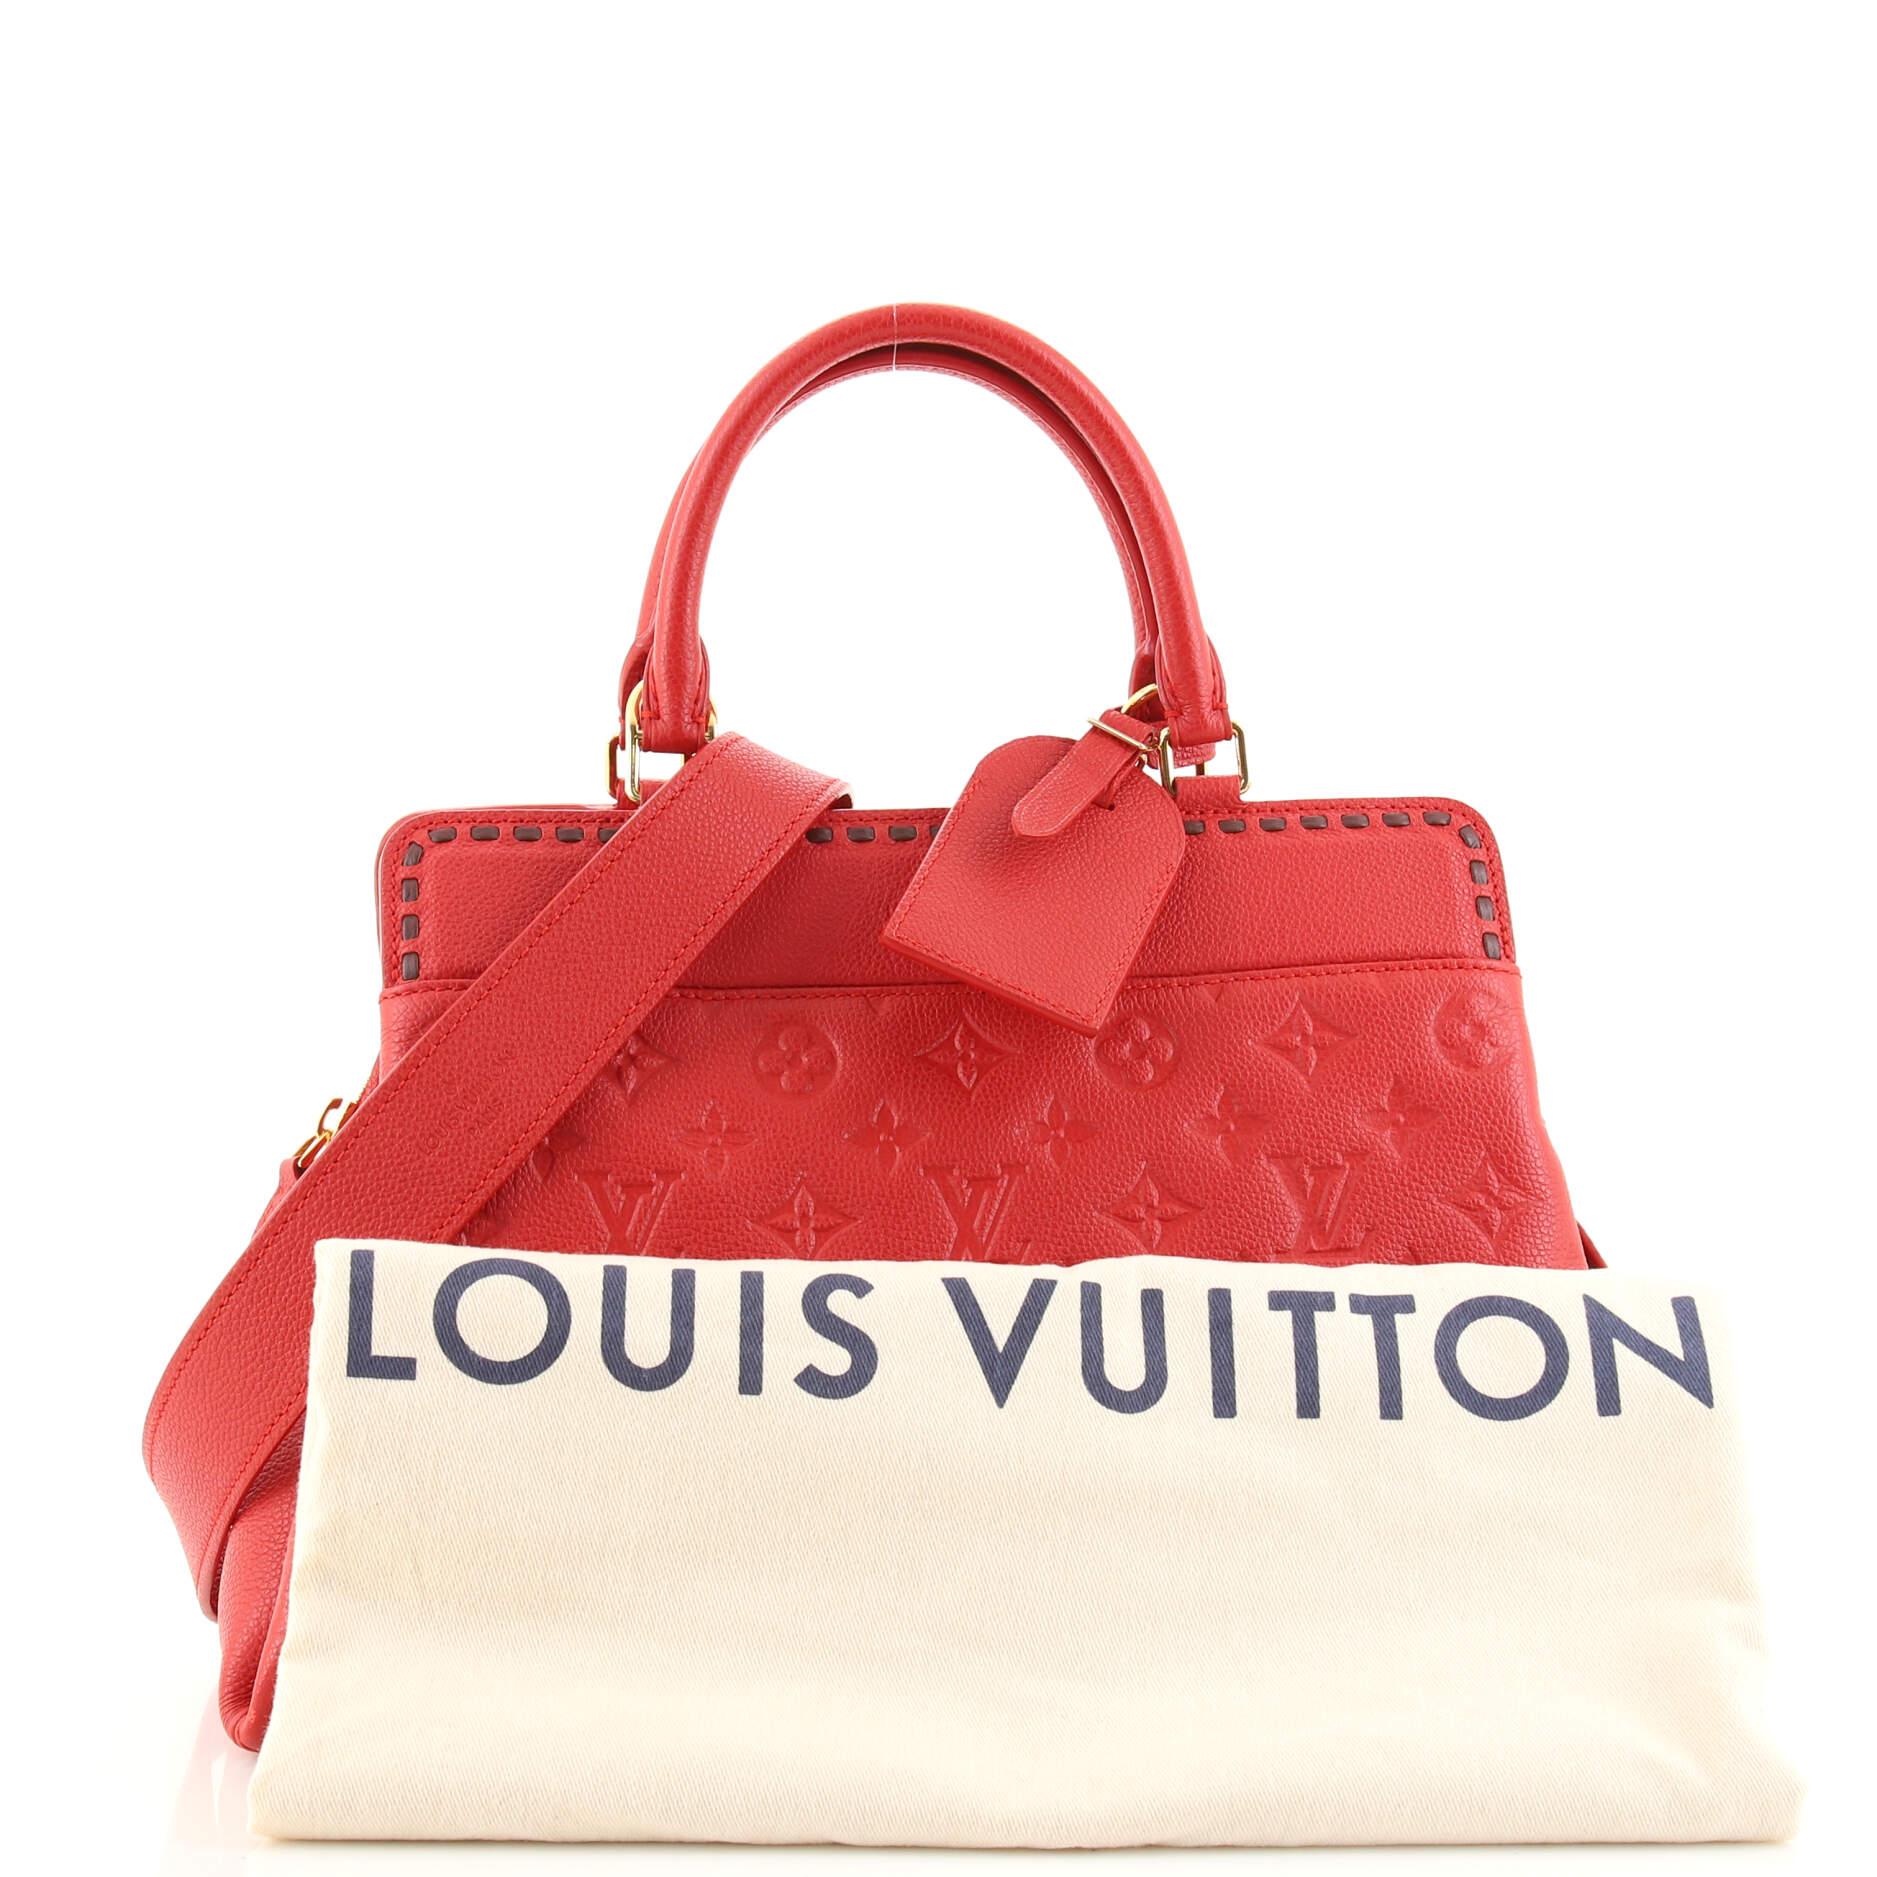 Louis Vuitton Vosges - For Sale on 1stDibs